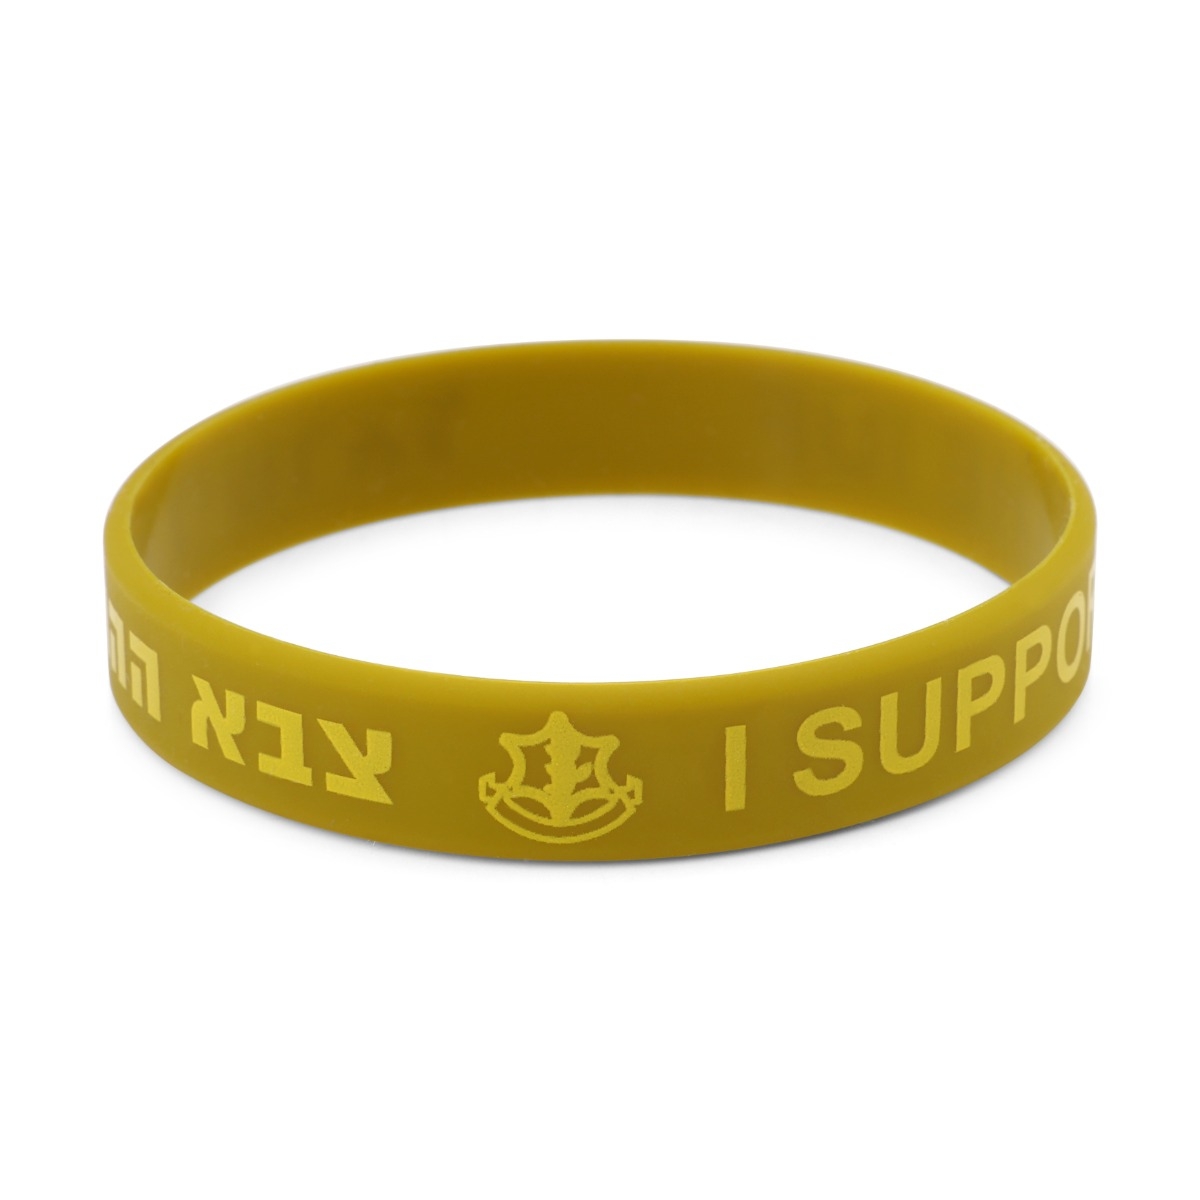 Rubber Bracelet - I Support the IDF, Jewish Gifts from Israel